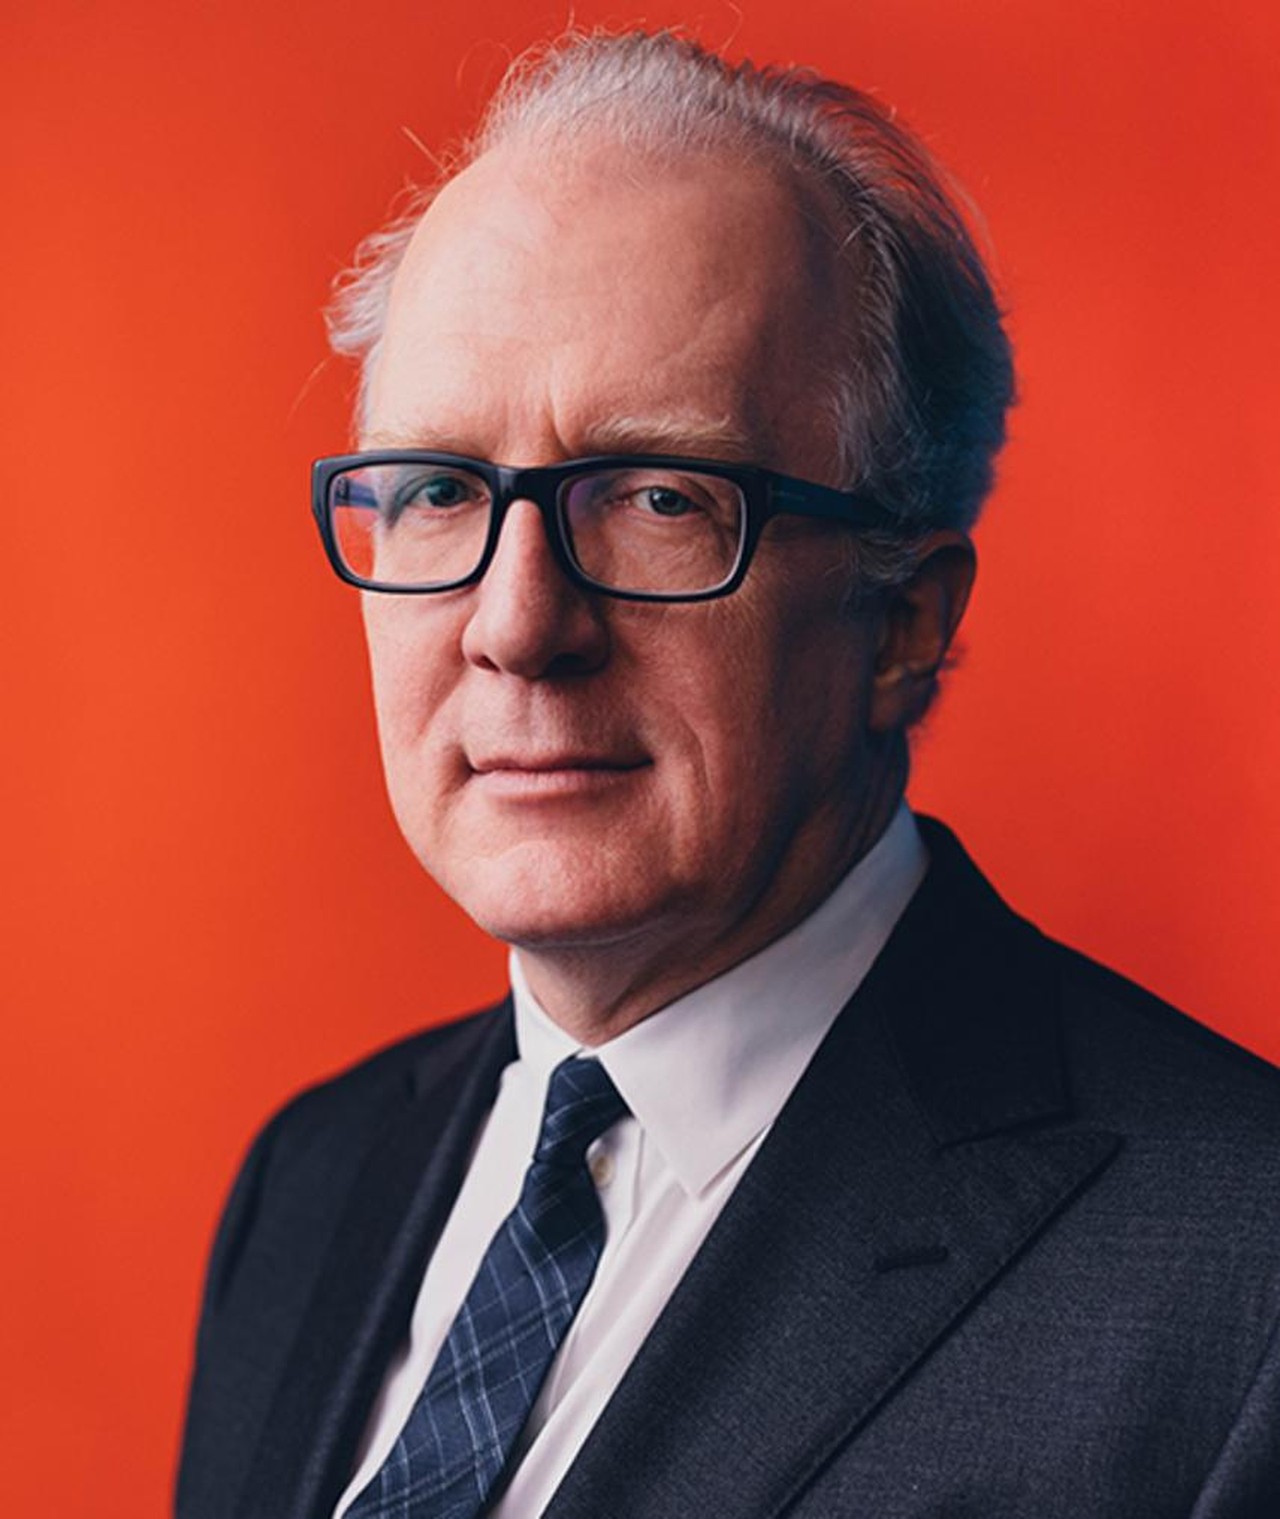 Tracy Letts, Biography, Plays, Movies, & Facts